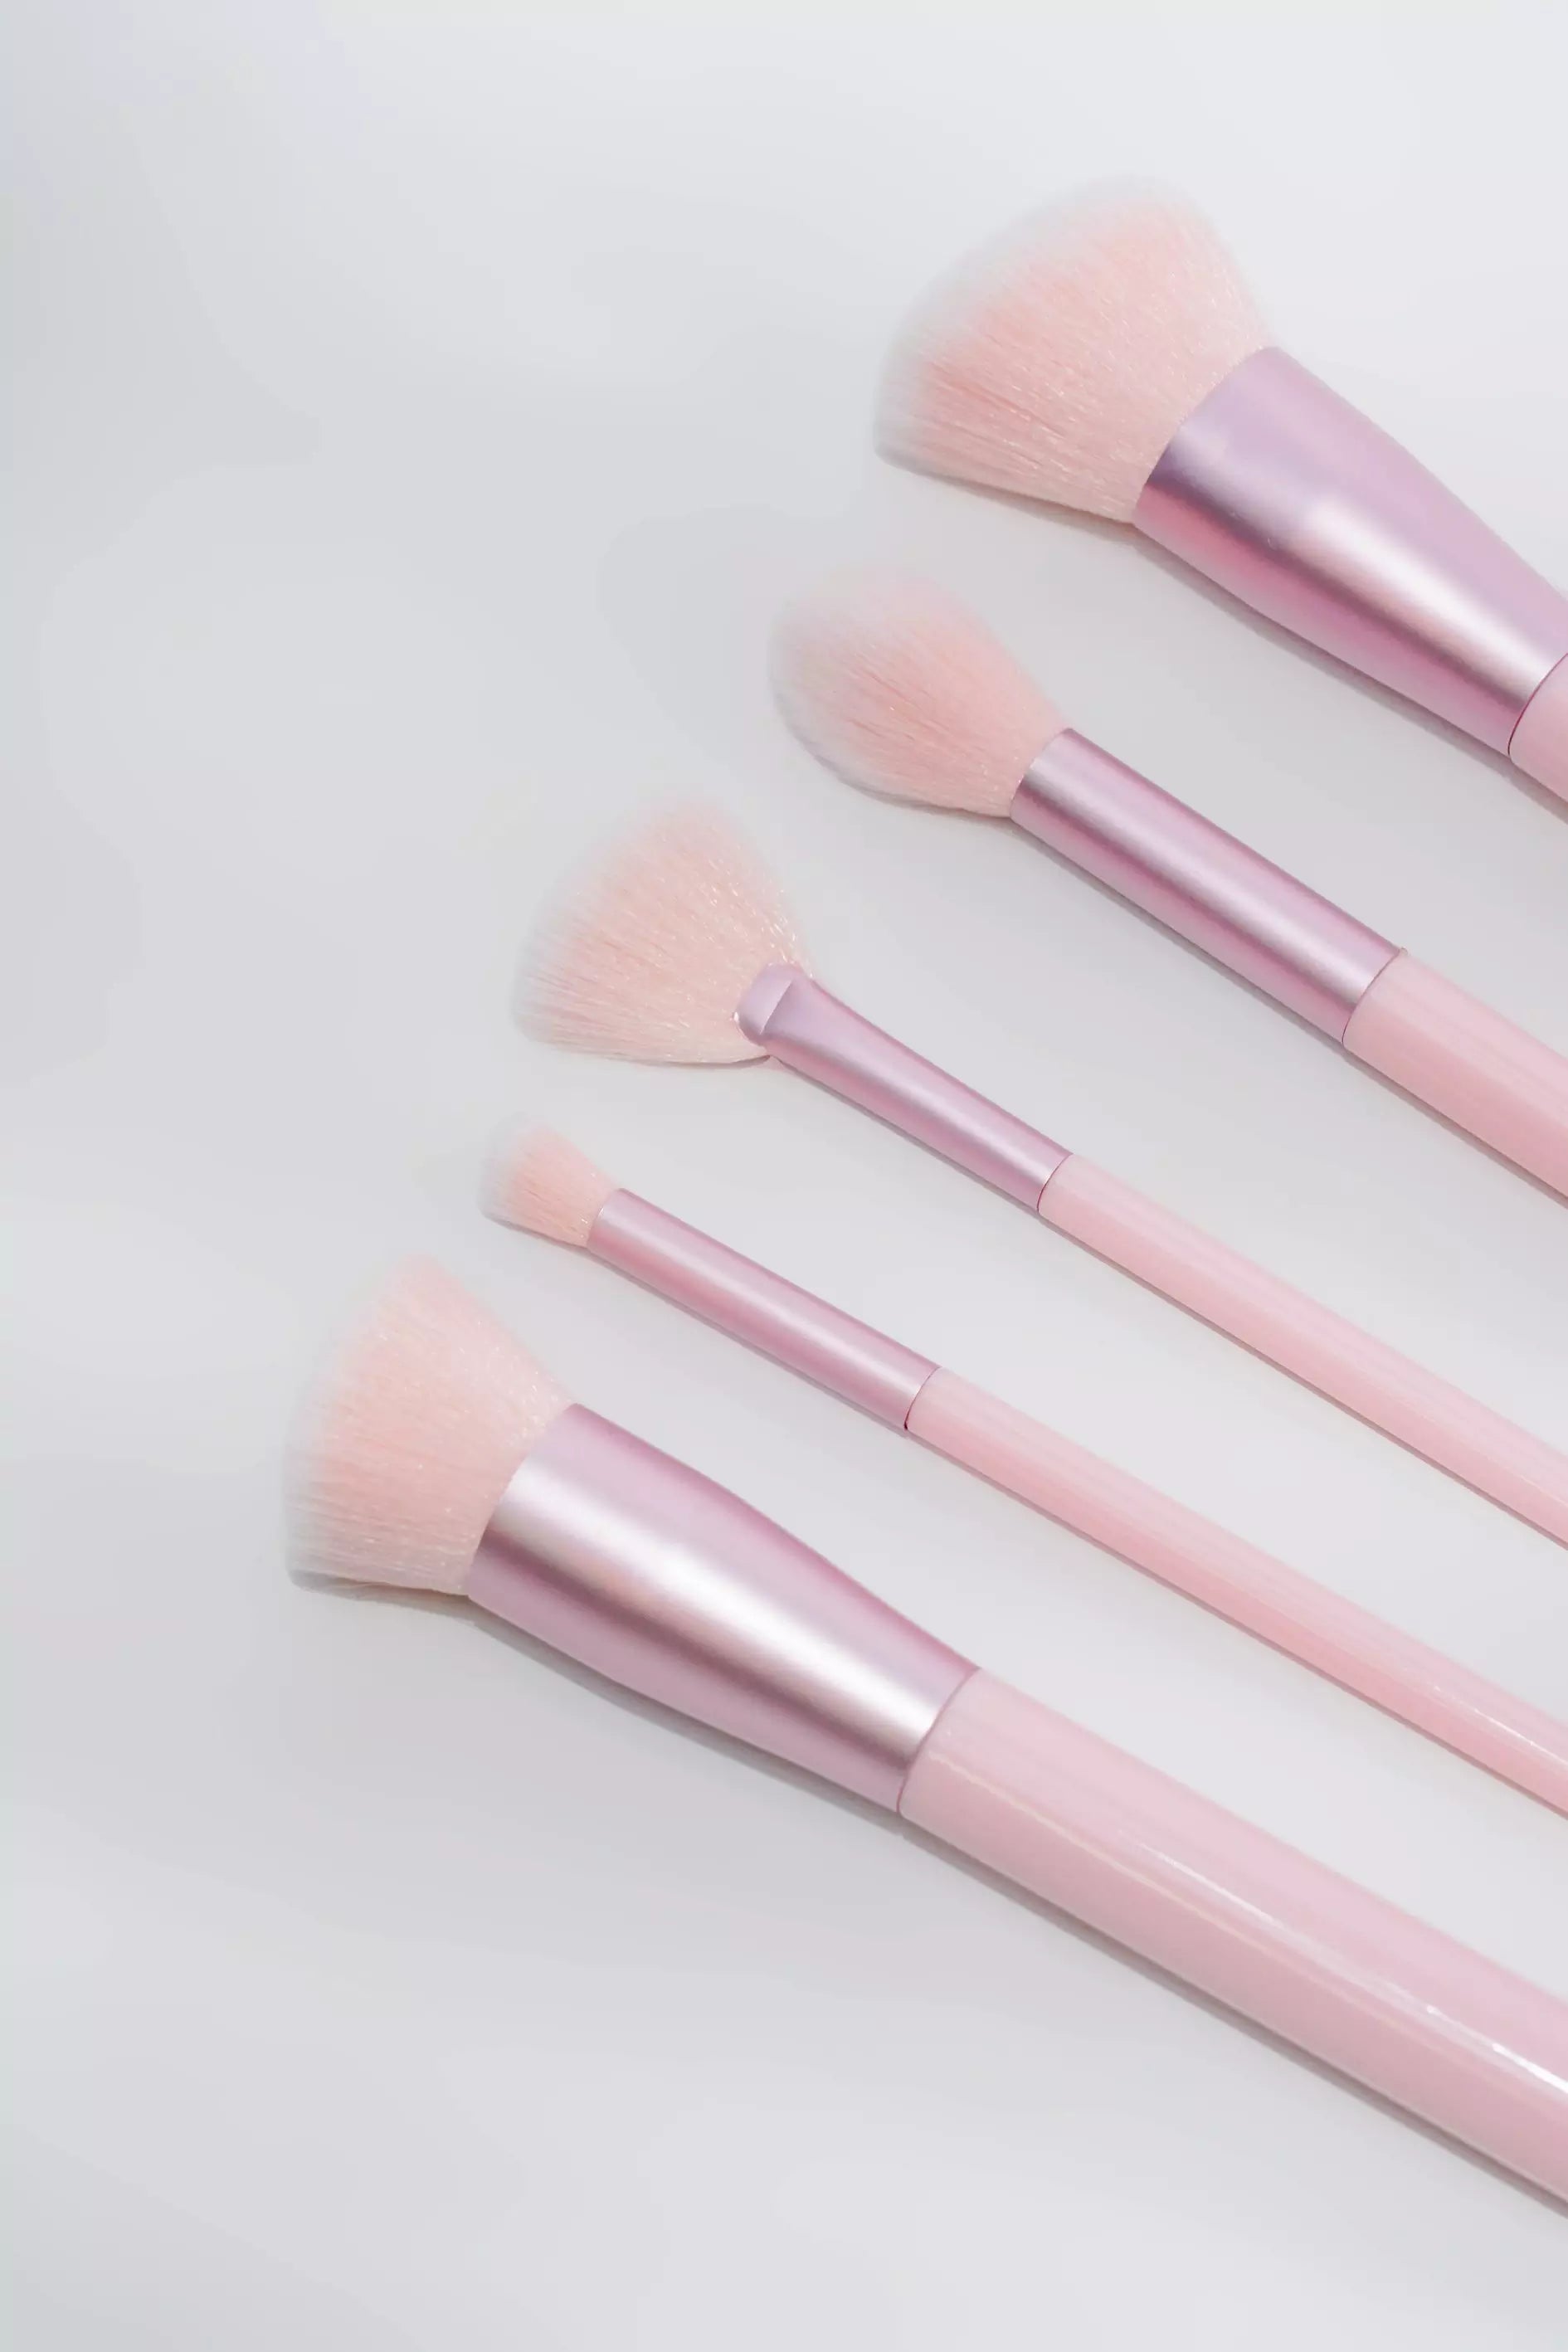 5-pack contour makeup brushes all day perfection